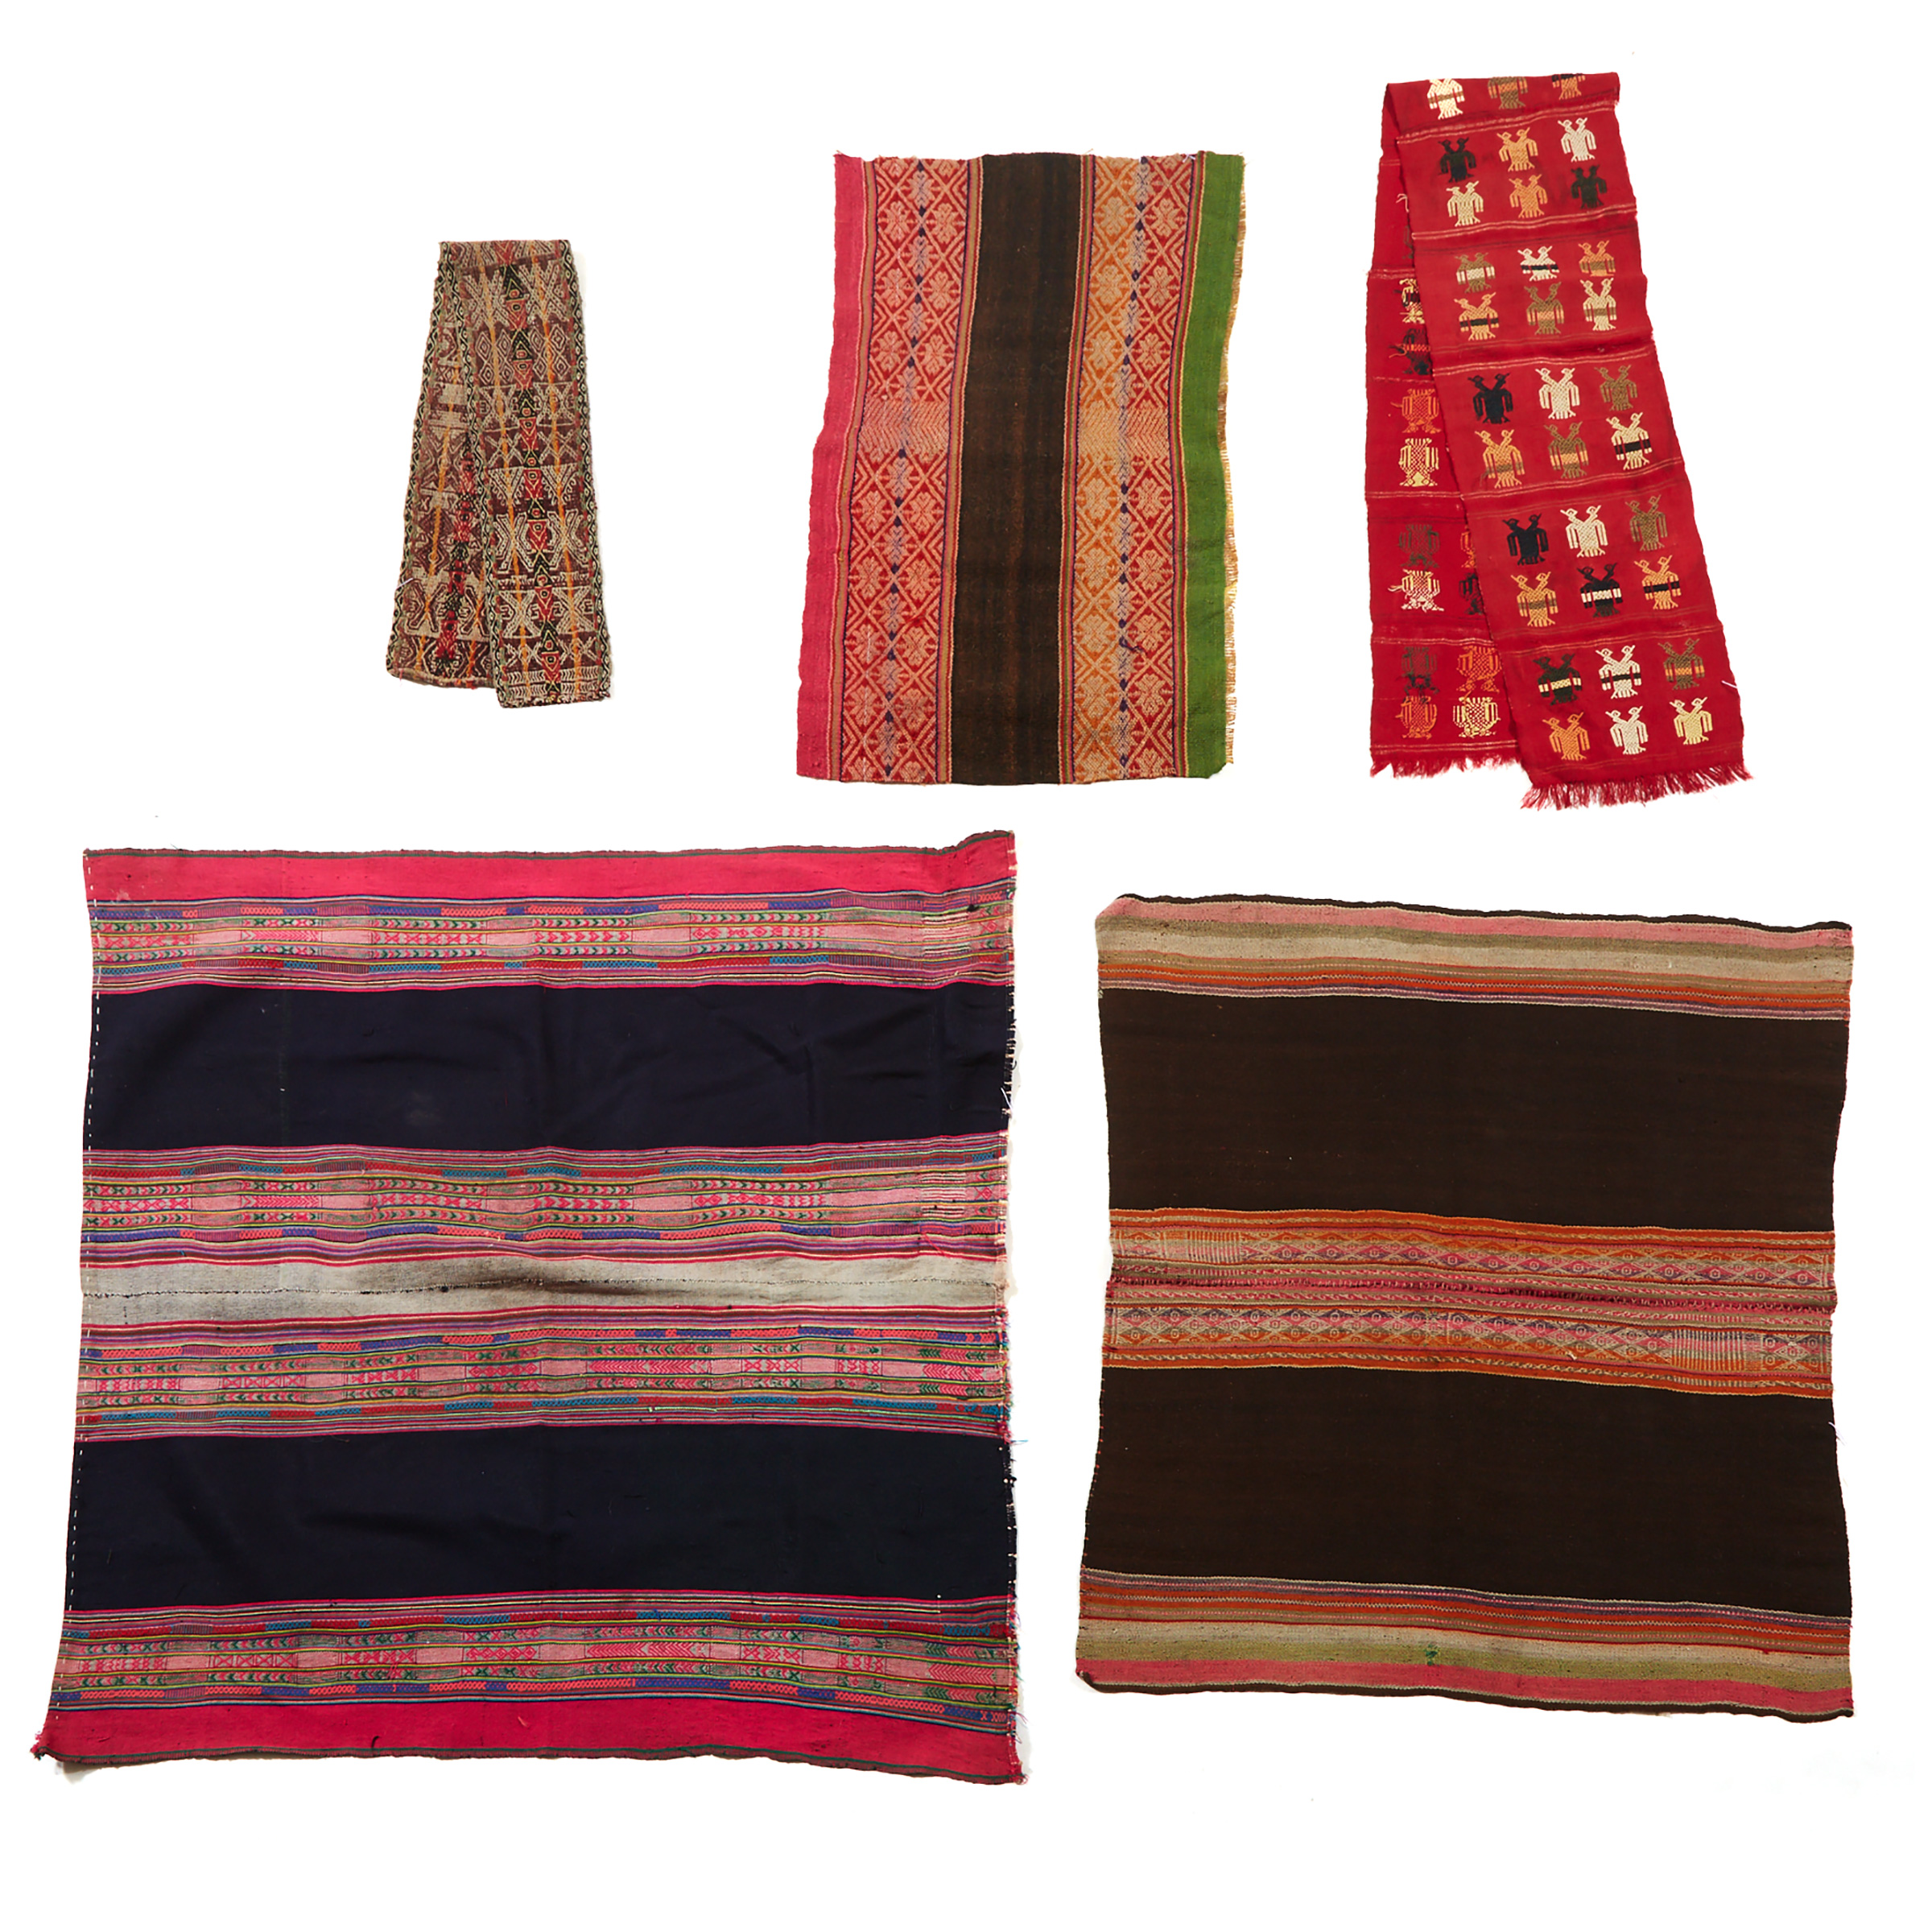 Group of Five South American Textiles, including Four Peruvian Aymara weavings